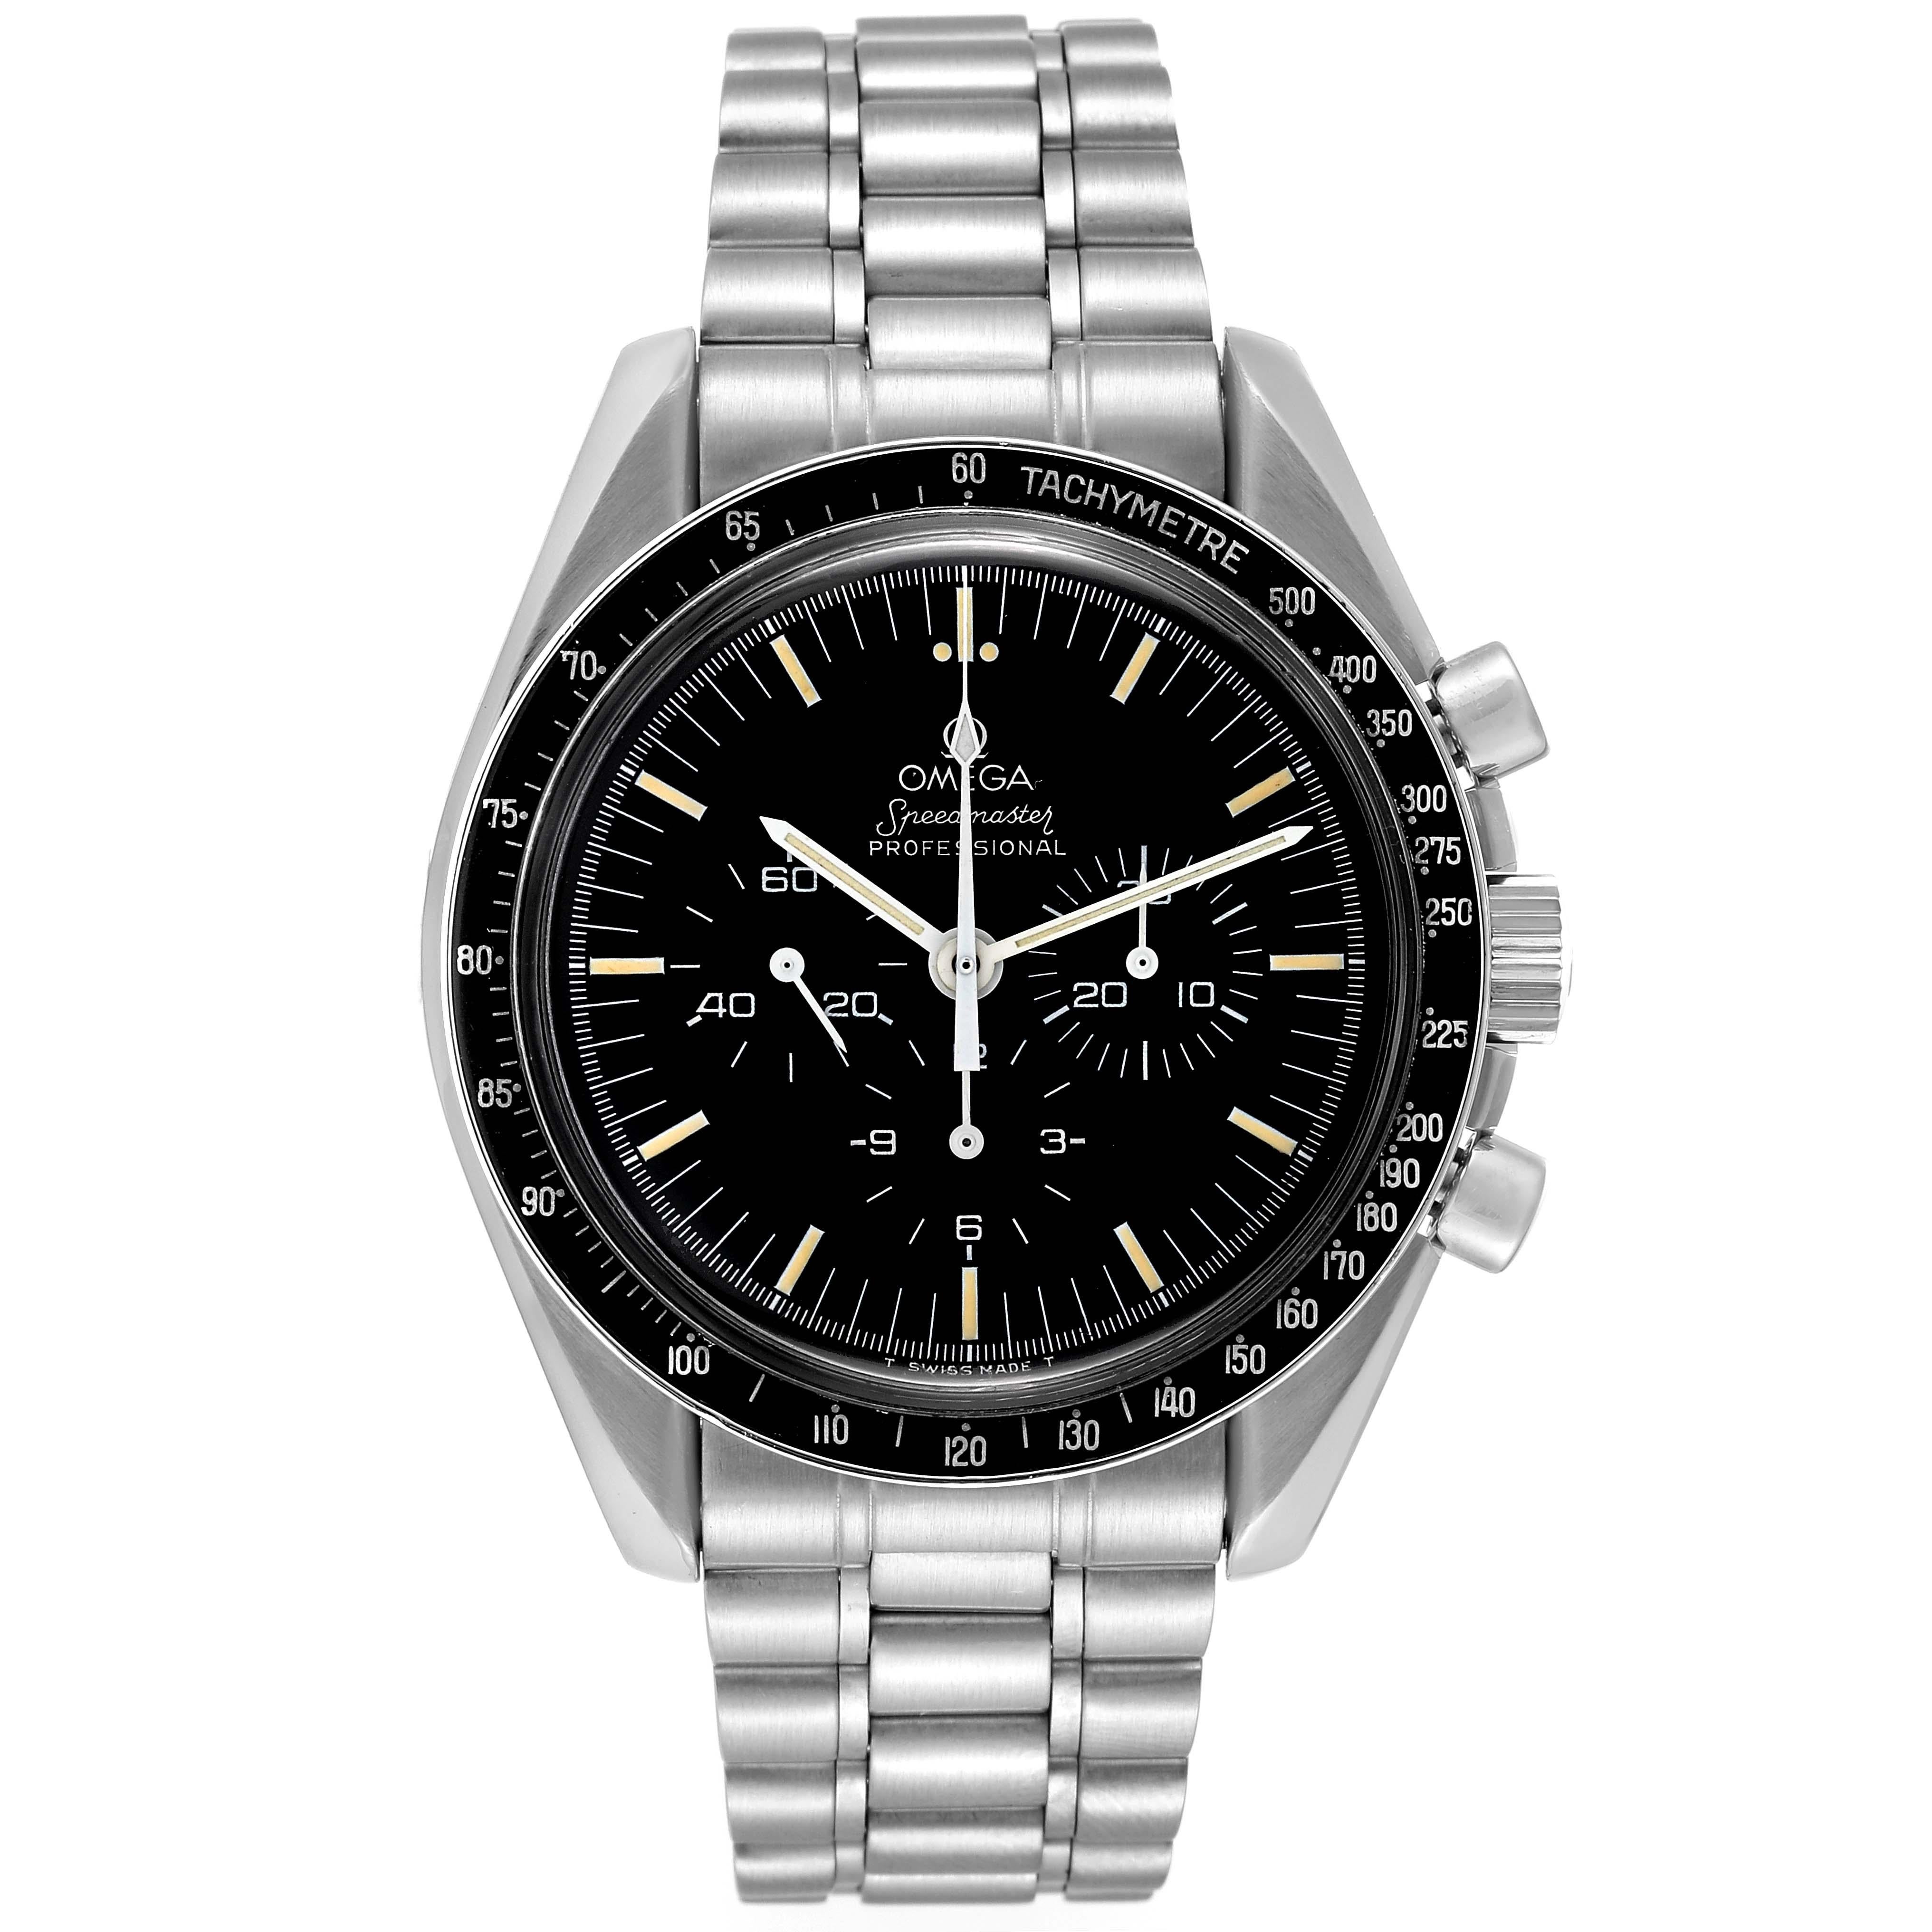 Omega Speedmaster 861 Black Dial Steel Mens Moon Watch 3590.50.00. Manual winding chronograph movement. Stainless steel case 42.0 mm in diameter. Three-body, screwed - down case. Omega logo on the crown. Black tachymeter bezel. Hesolite acrylic